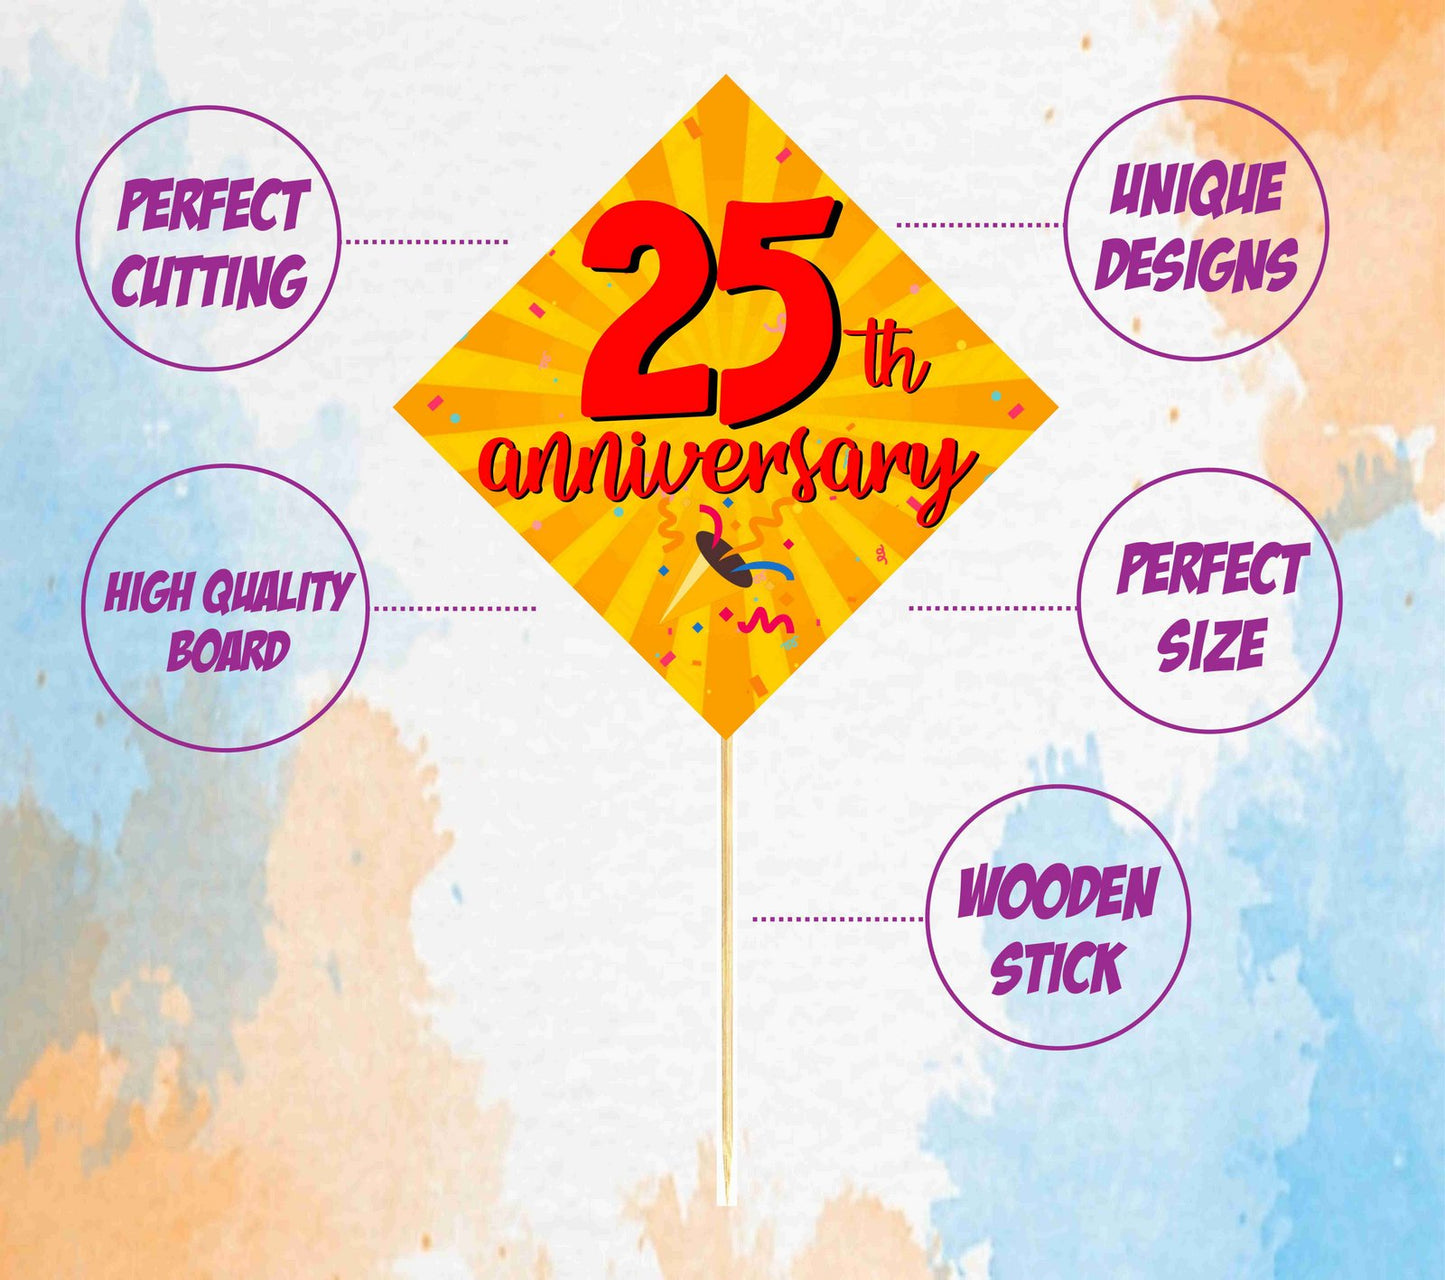 25th Anniversary Theme Props Anniversary Decoration Backdrop Photo Shoot, Photo Booth Party Item